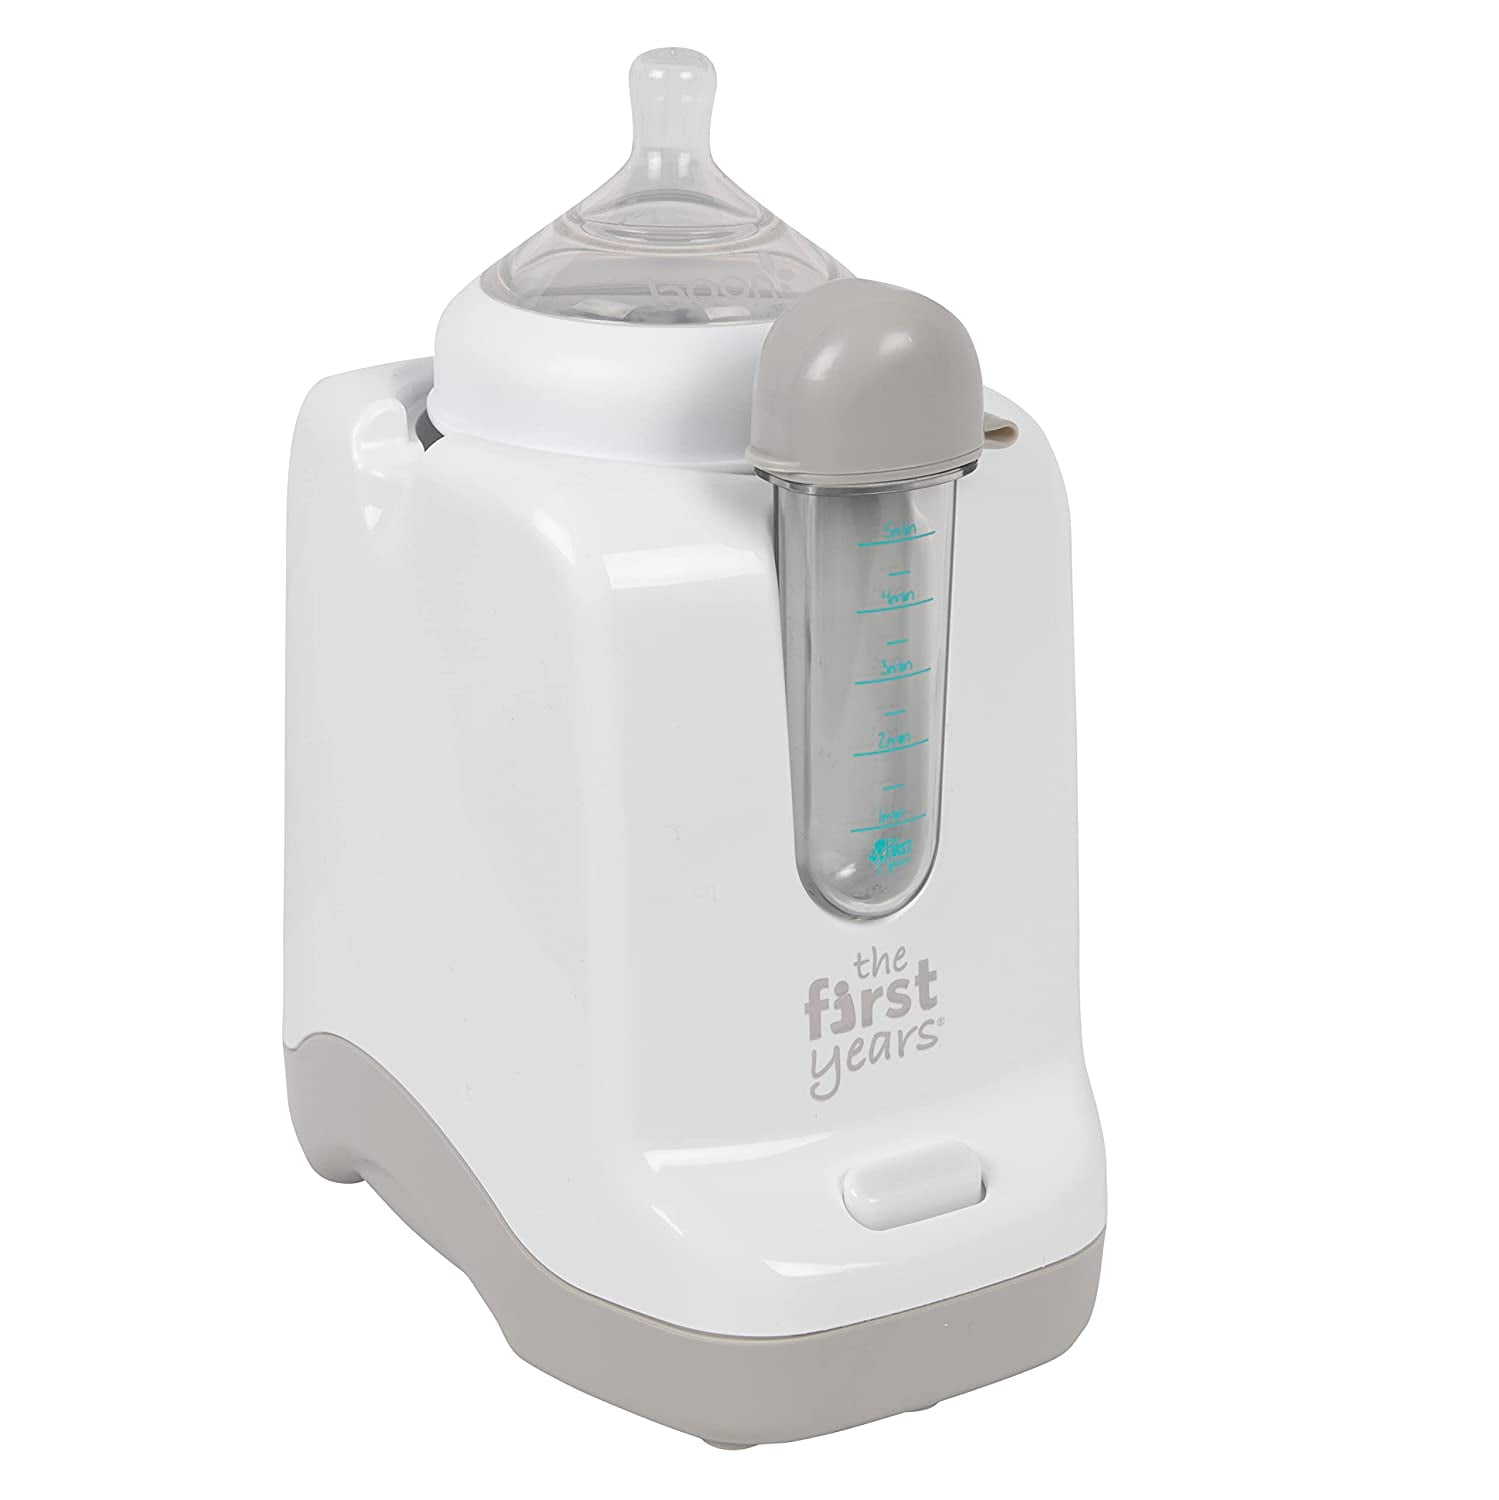 I have been using this bottle warmer everyday got a month and I love i, Momcozy